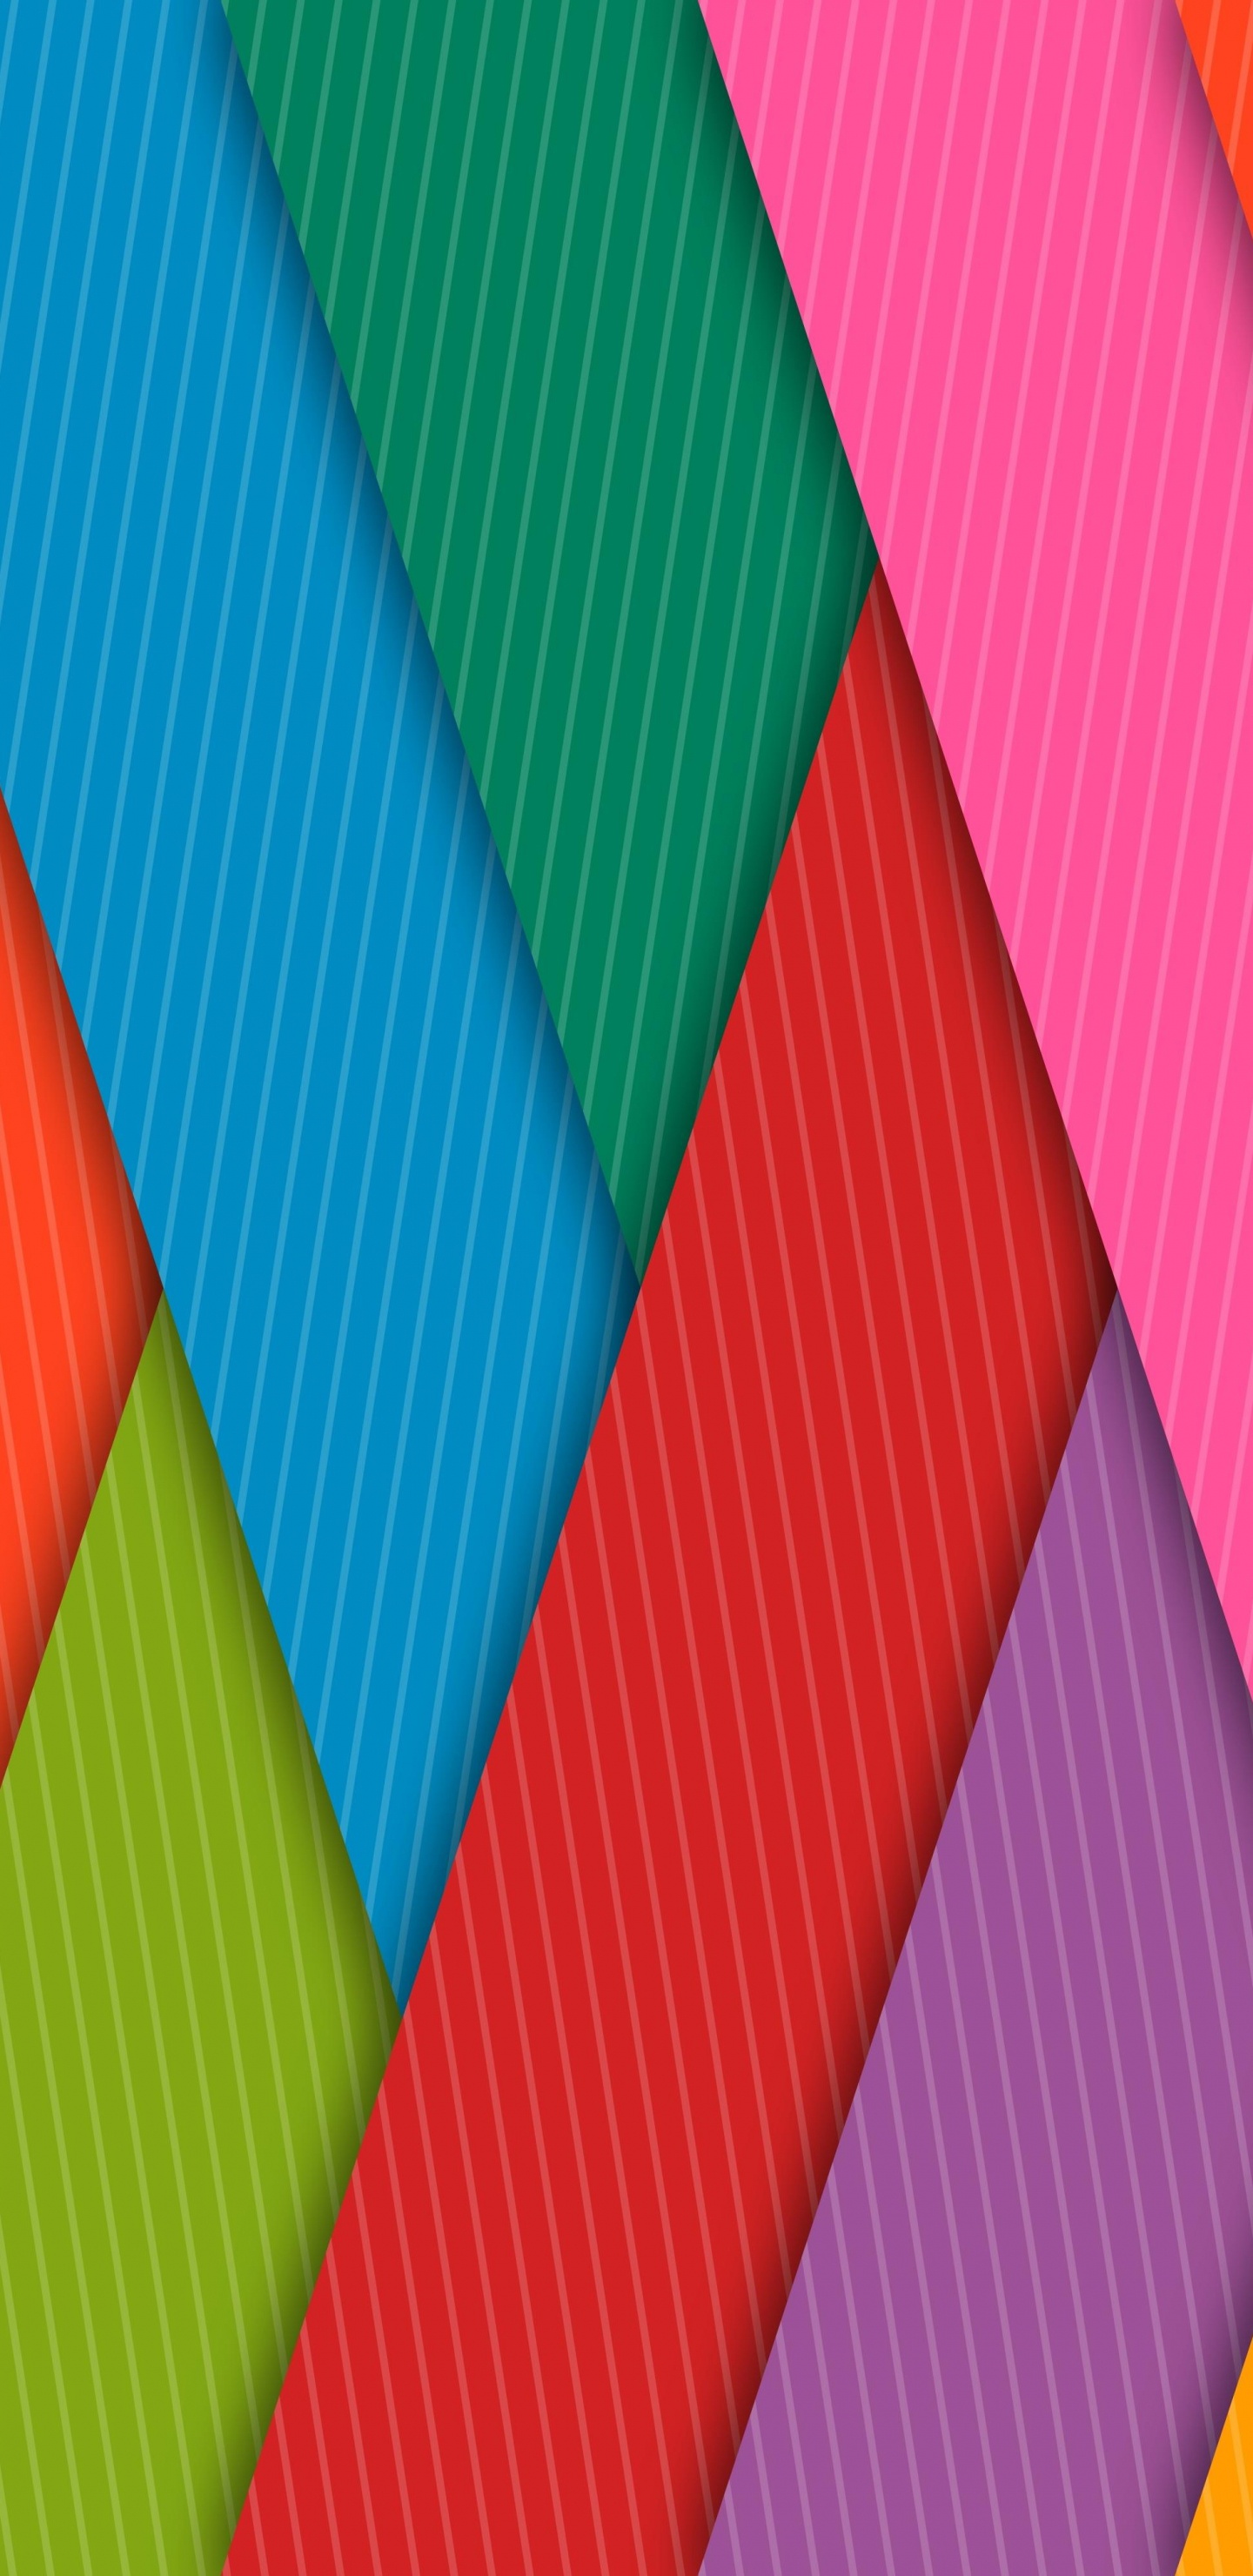 Red Blue and Green Striped Textile. Wallpaper in 1440x2960 Resolution